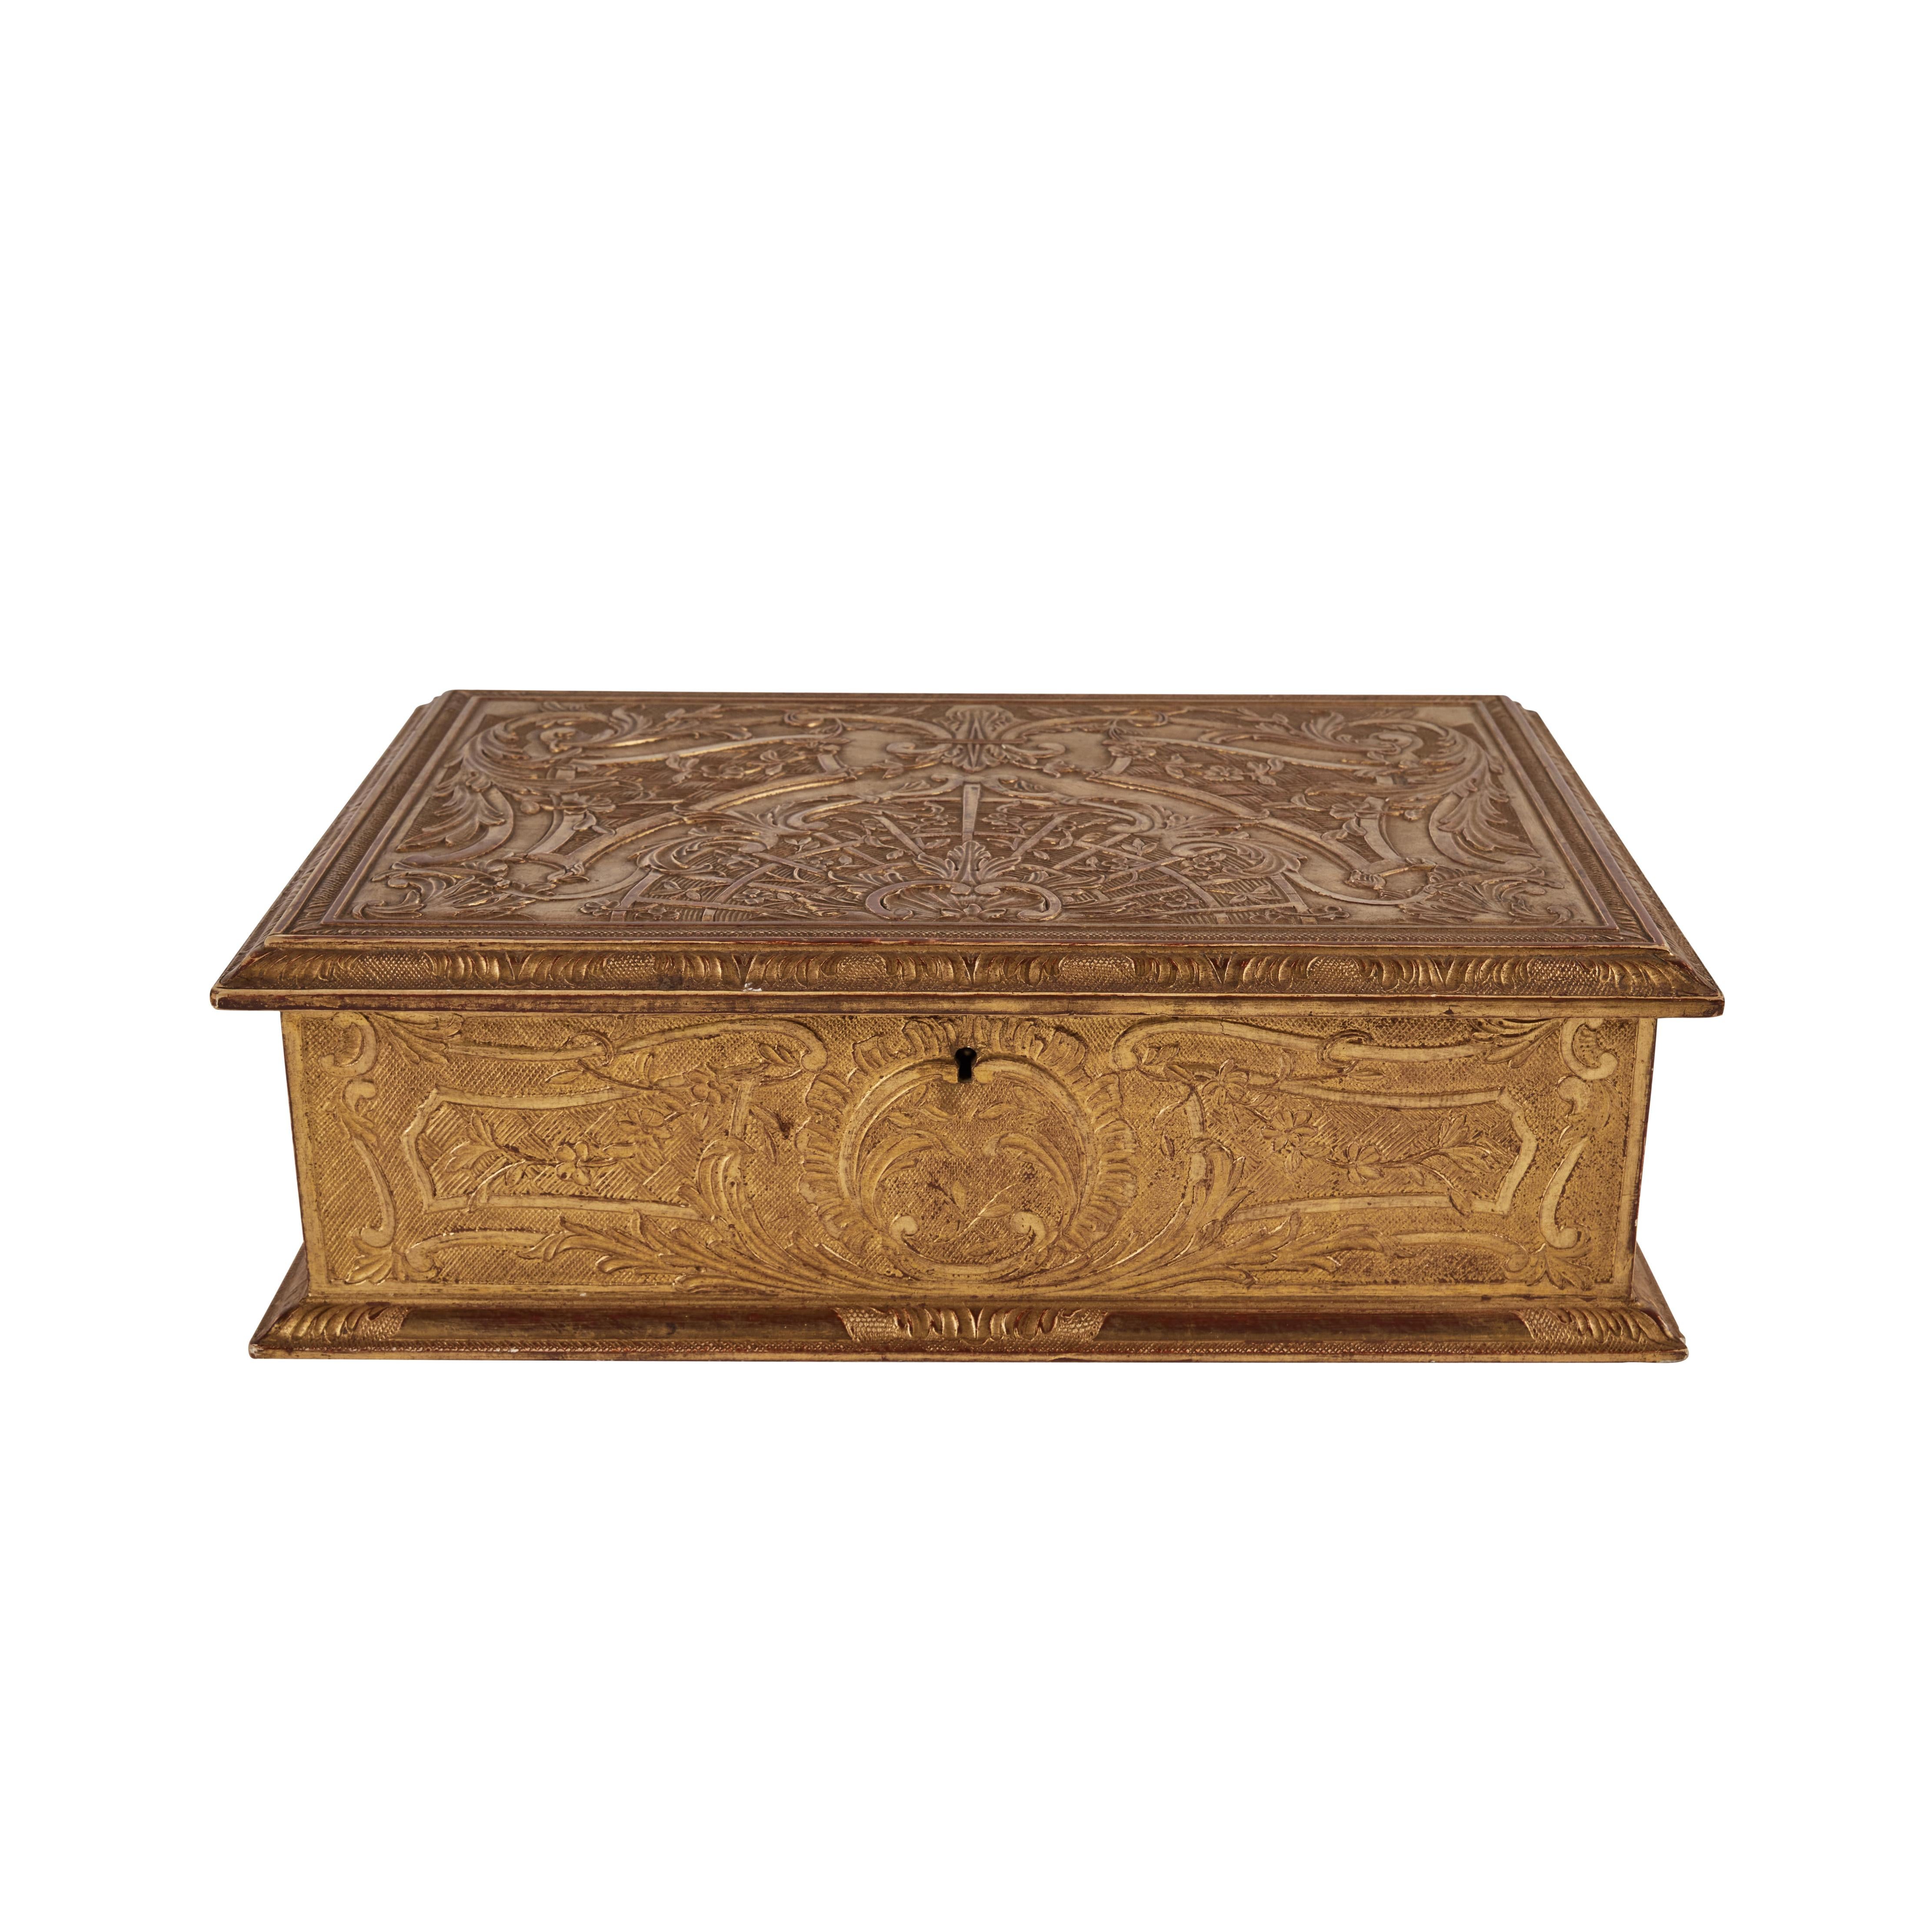 A richly hand-carved, hinged-top, gilt wood box. The whole embellished in scrolling foliate forms. Removable fitted tray.